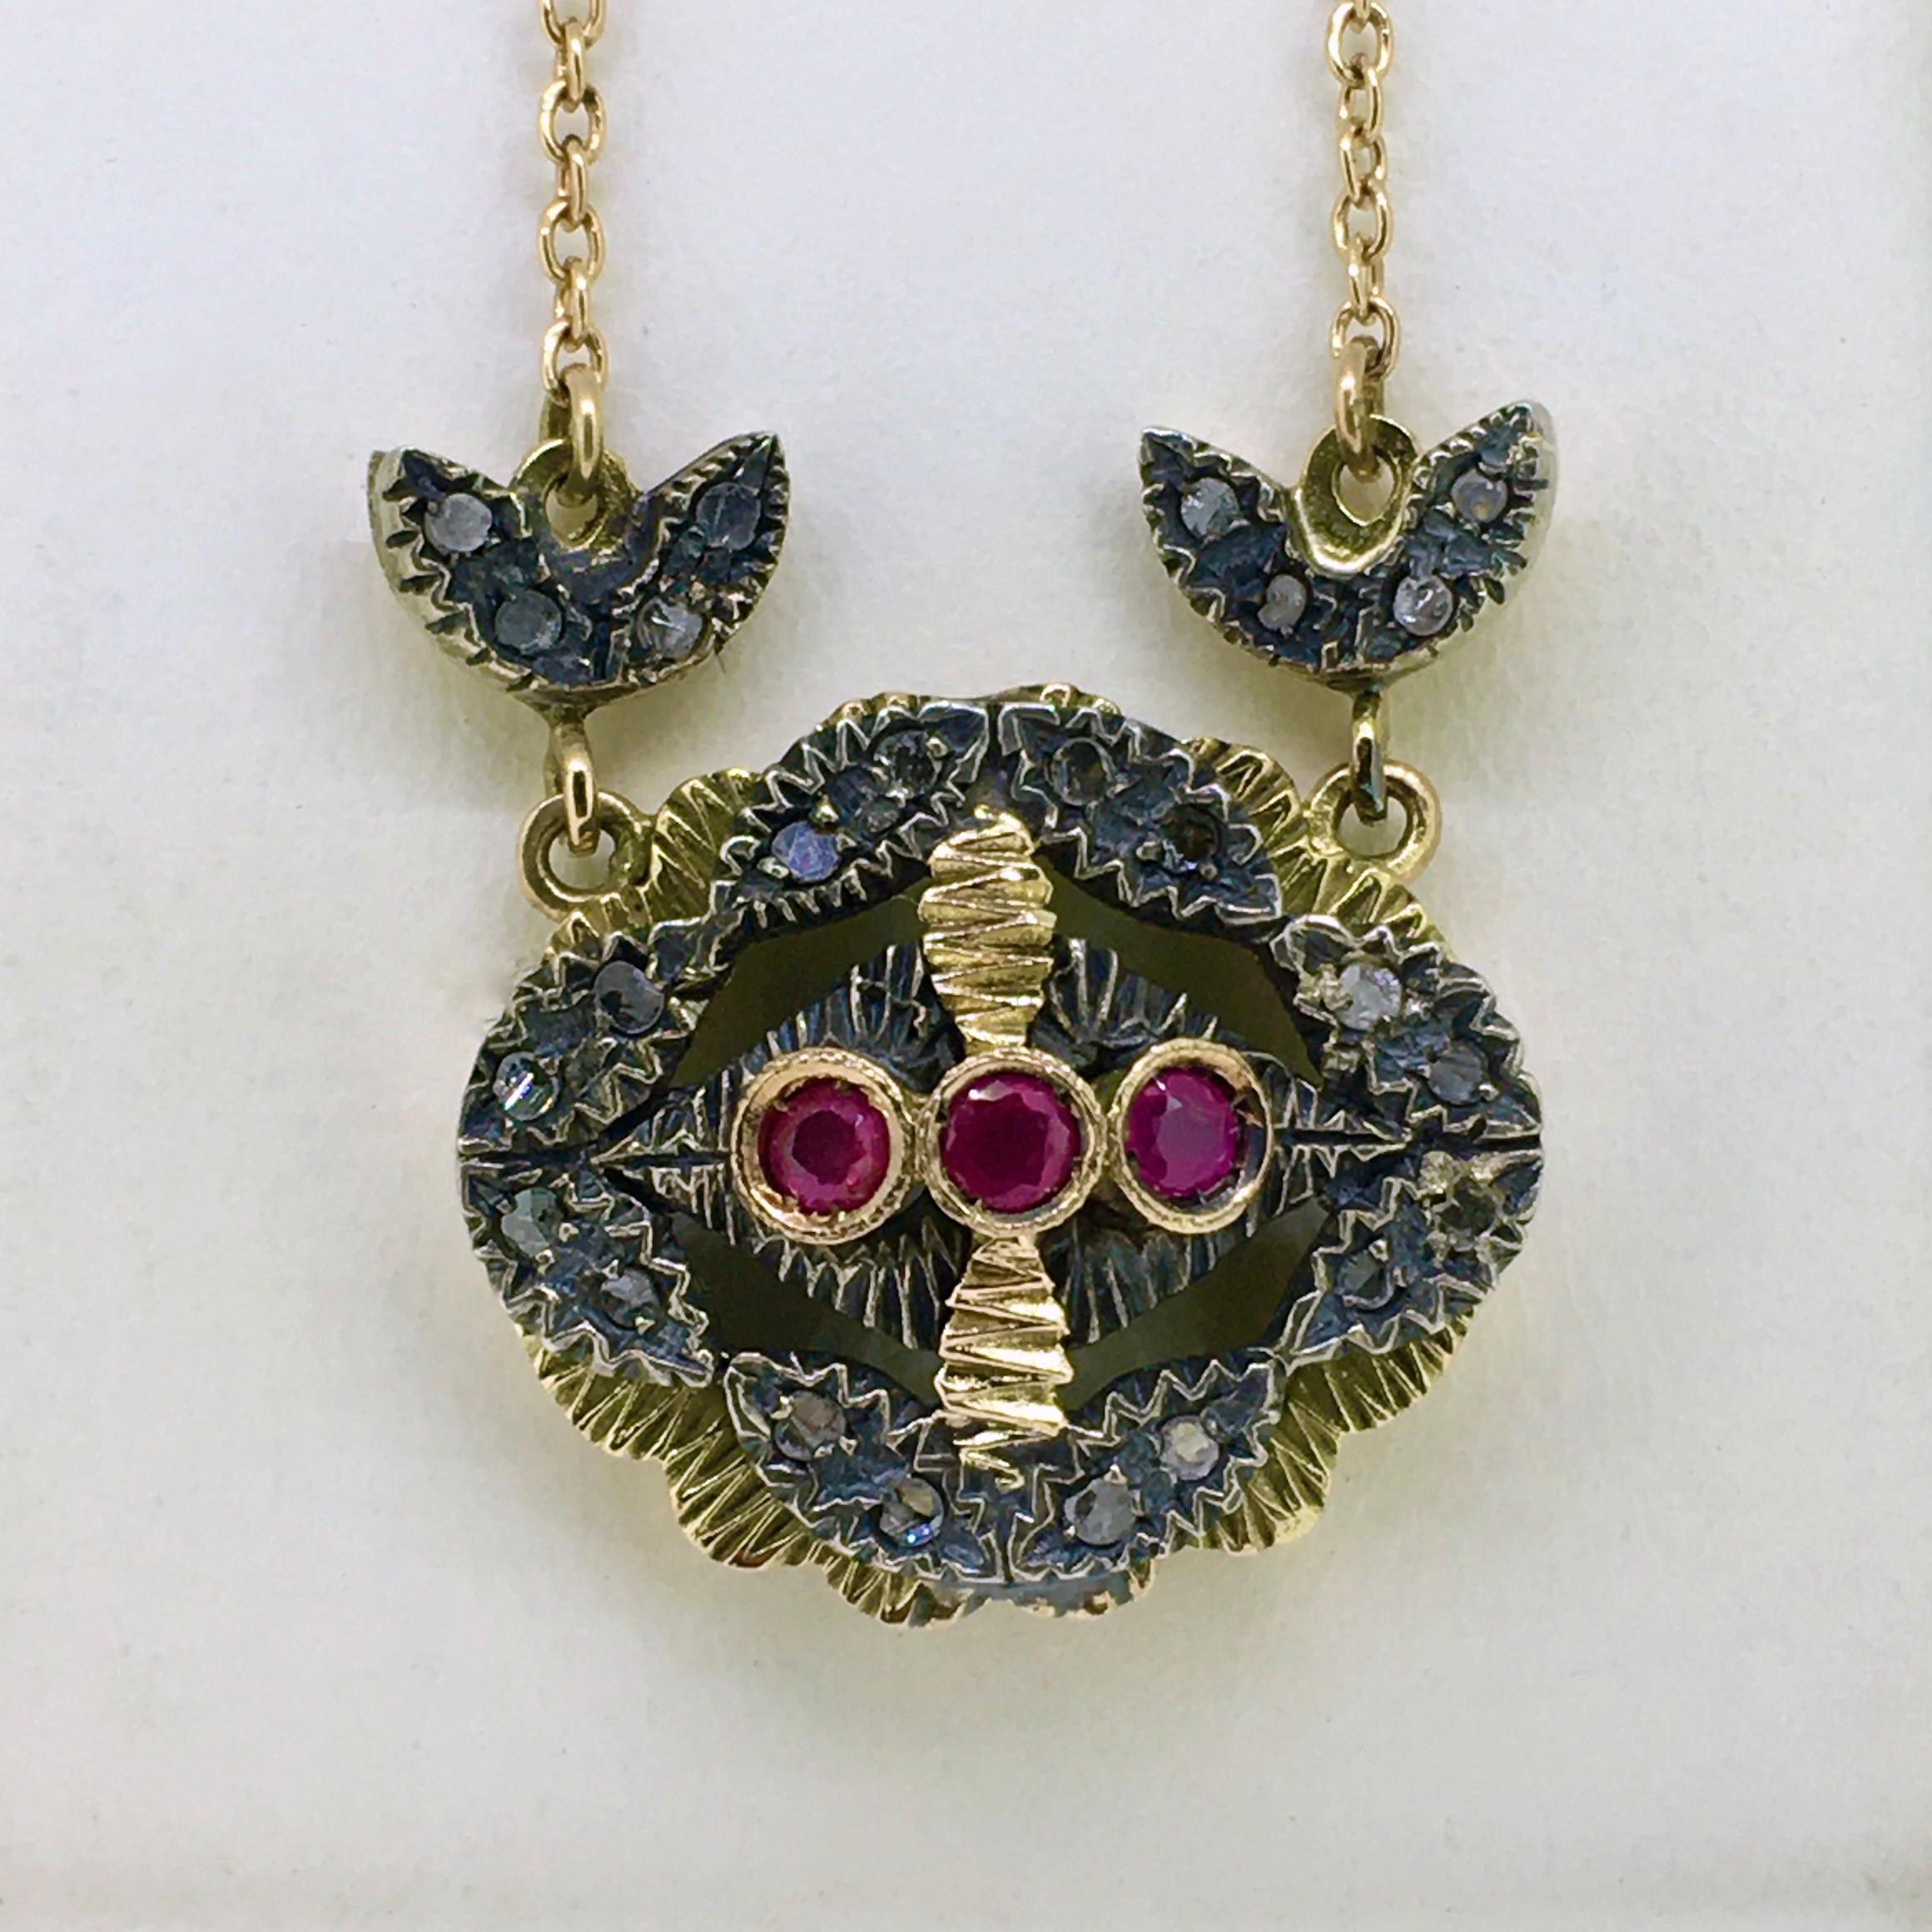 Antique Pendant Necklace, 12 carat yellow gold set with 3 rubies, the silver aplique is set with old mine cut diamonds. This lovely pendant has its original chain necklace. The length is 42 cm. The overall condition of this pendant necklace is very